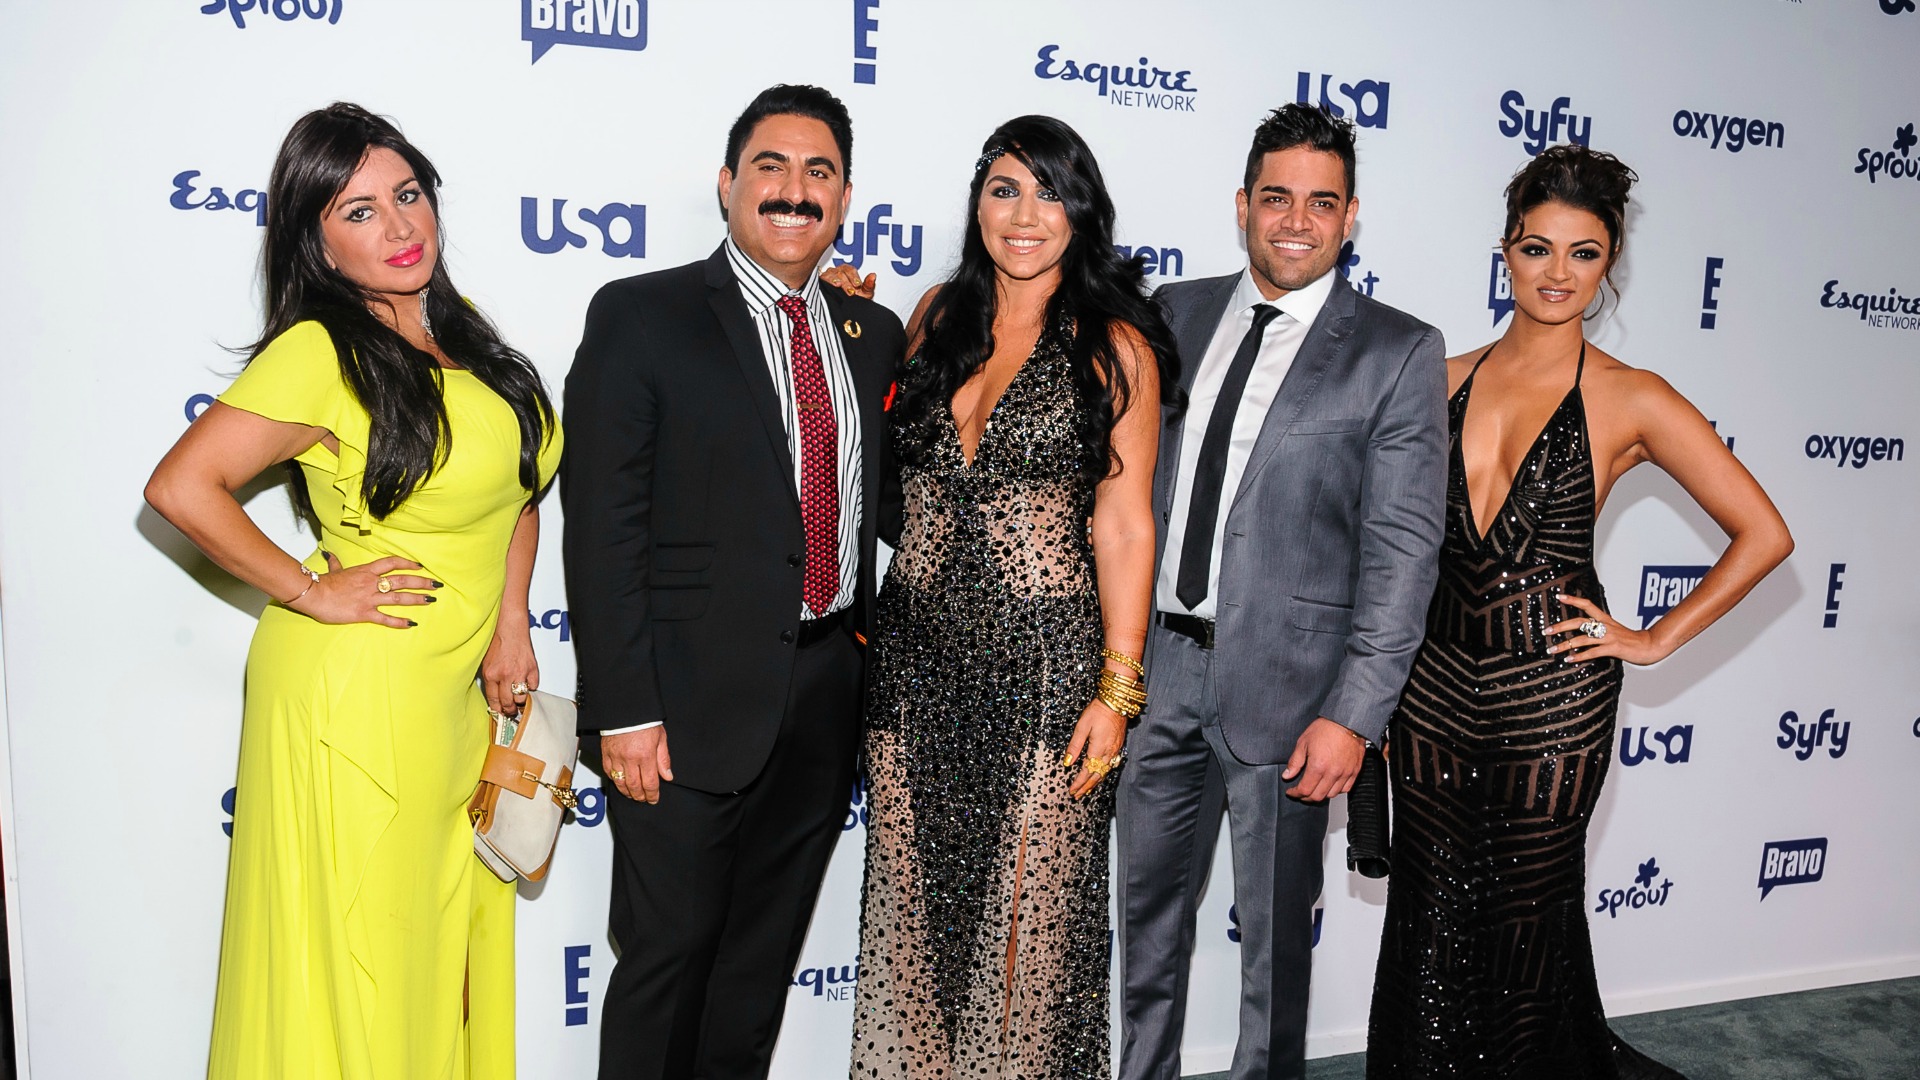 charley mchugh recommends shahs of sunset star pic